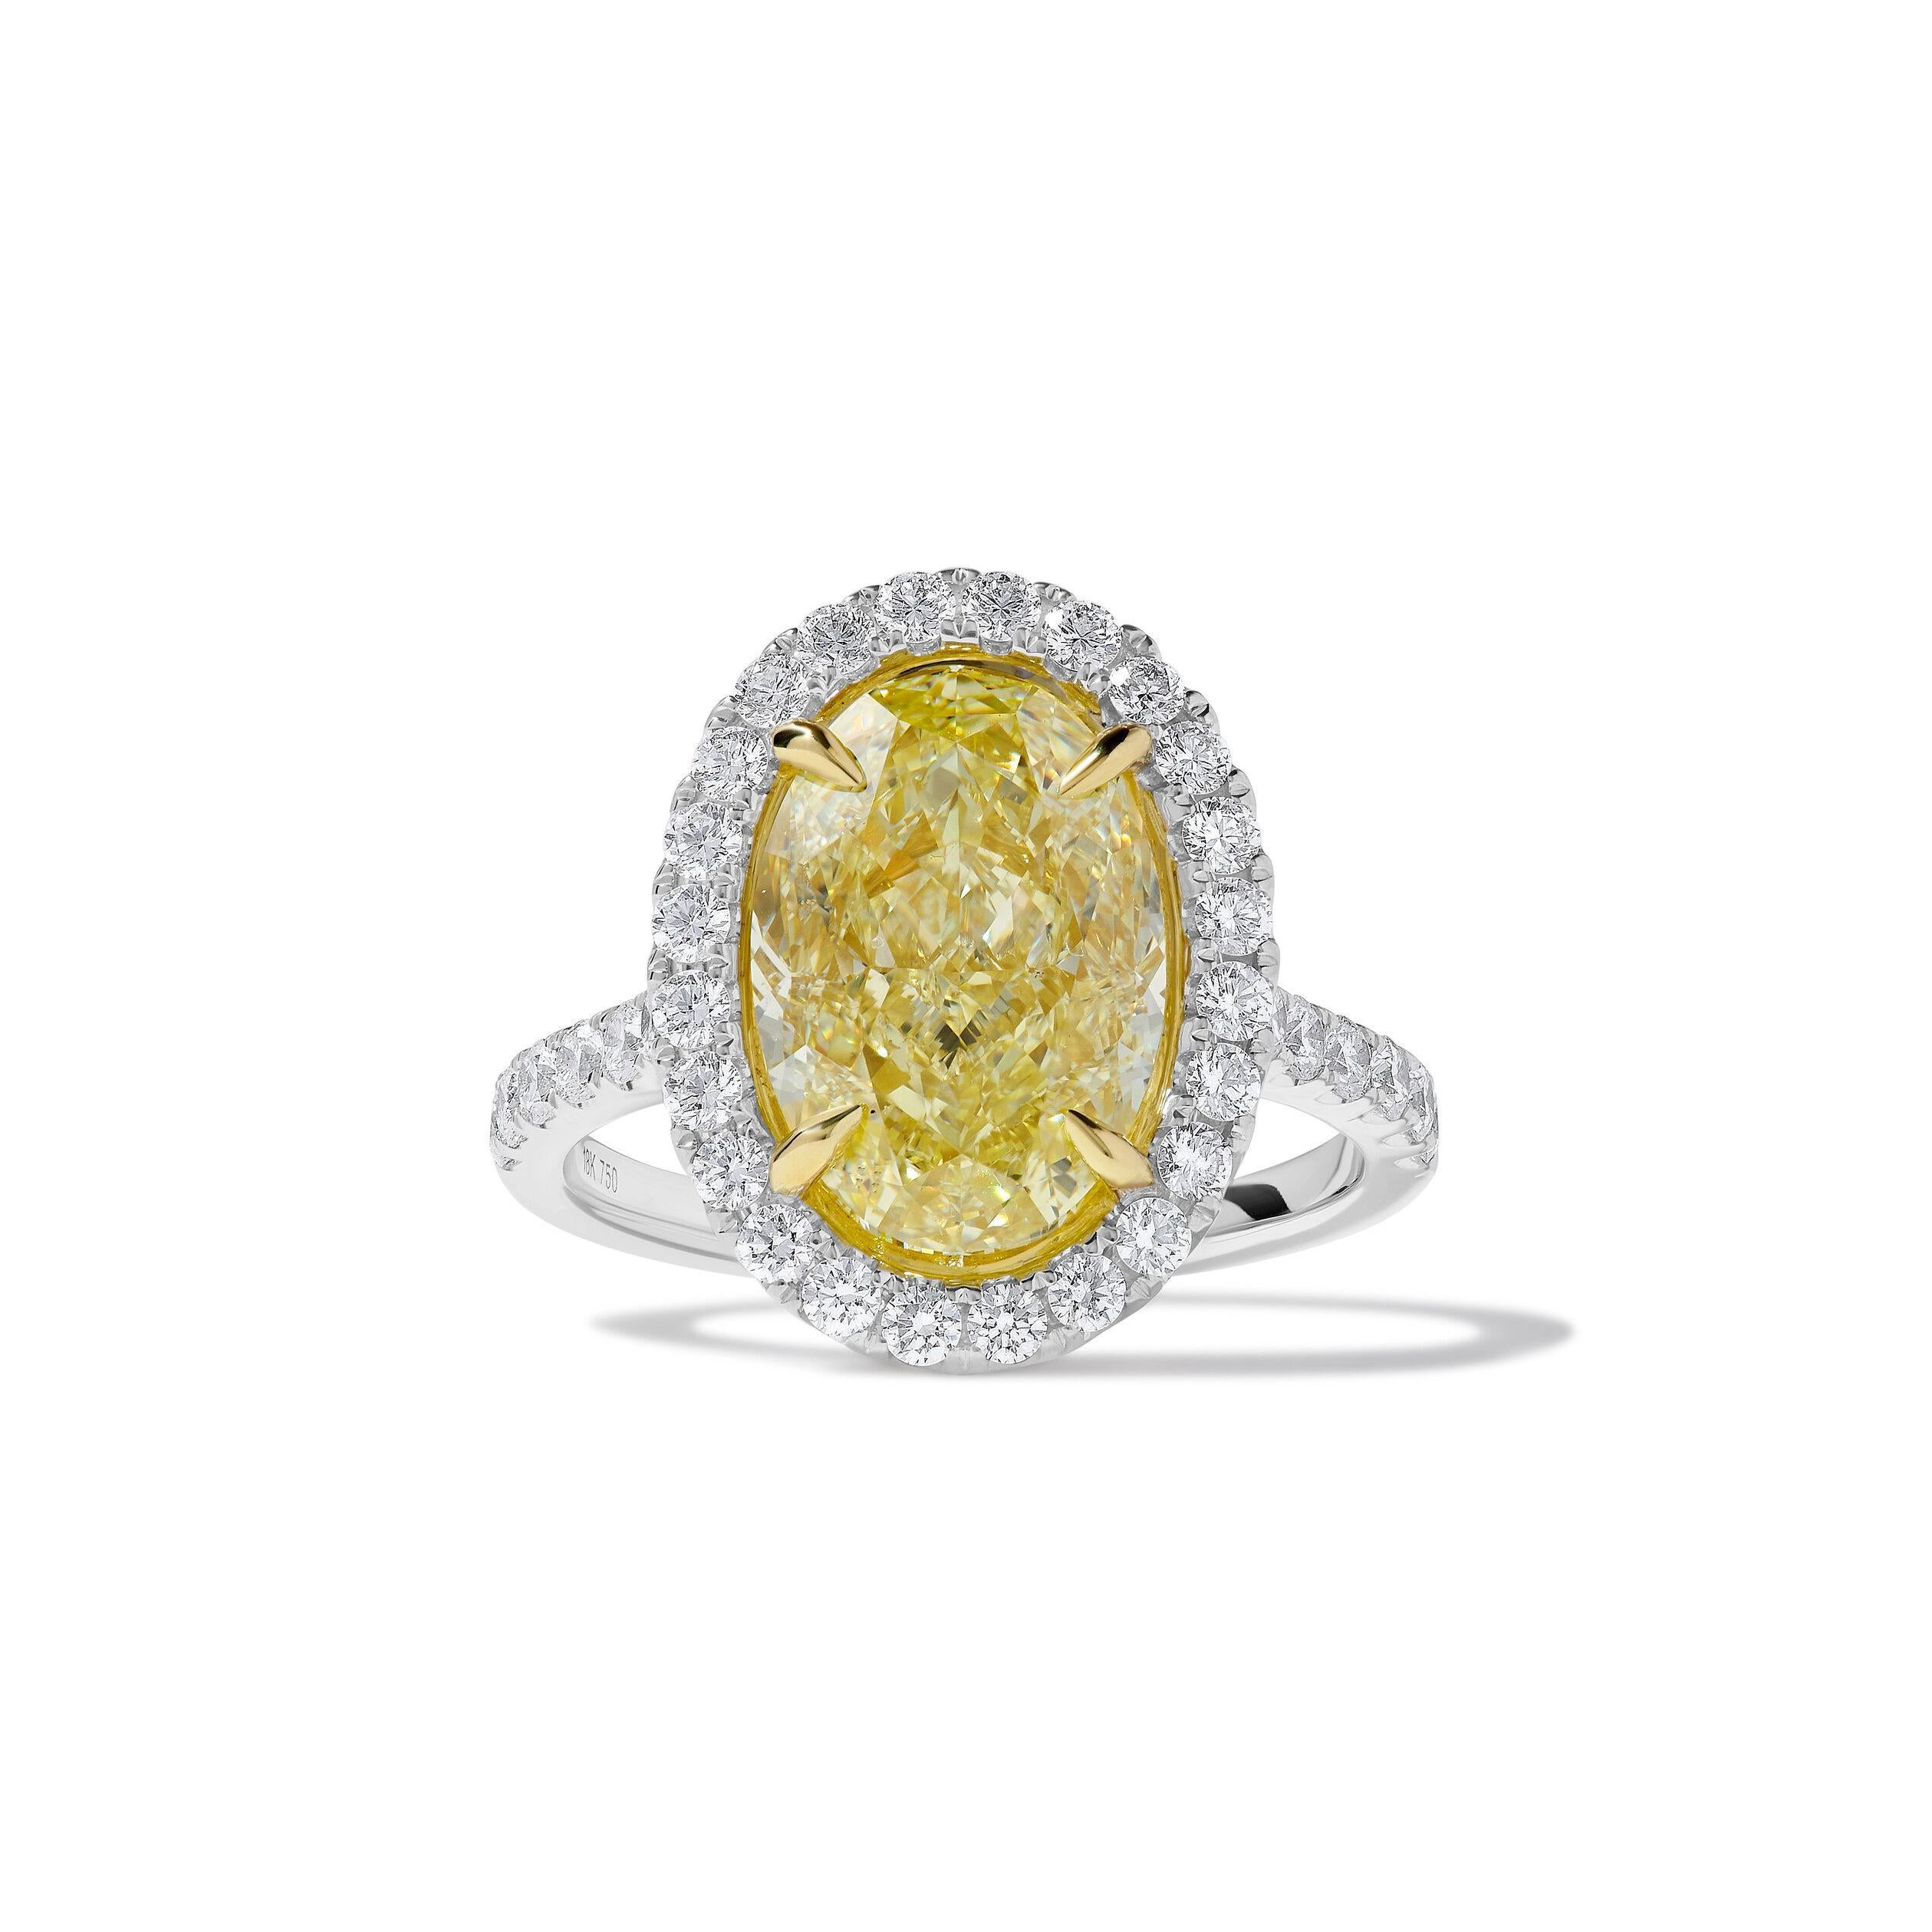 RareGemWorld's classic GIA certified diamond ring. Mounted in a beautiful 18K Yellow and White Gold setting with a natural oval cut yellow diamond. The yellow diamond is surrounded by round natural white diamond melee. This ring is guaranteed to